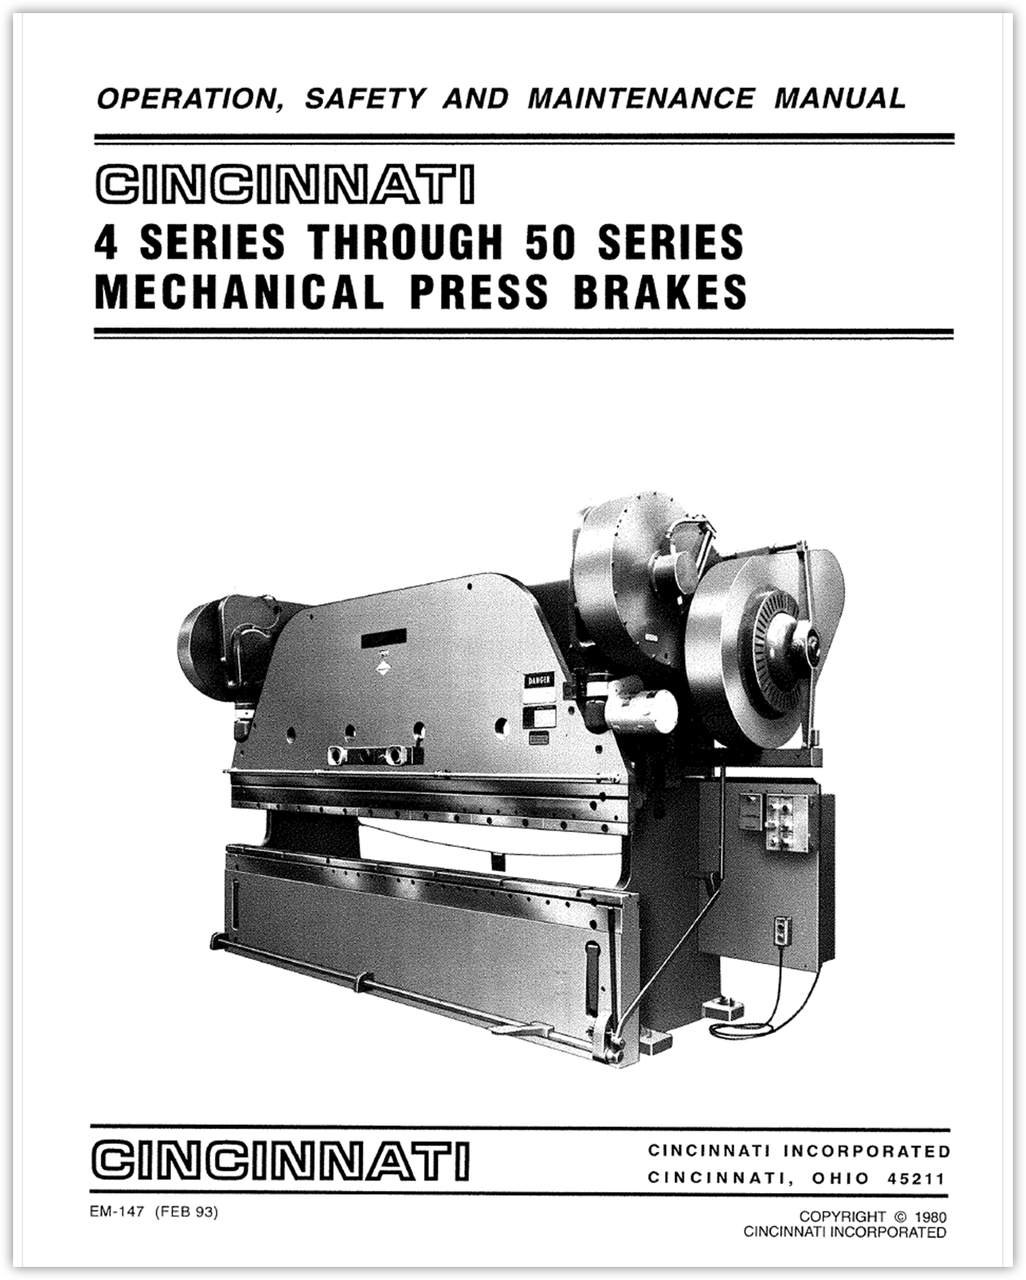 EM-147 (FEB 93) - 4 Series Through 50 Series Mechanical Press Brakes - Operation, Safety and Maintenance Manual